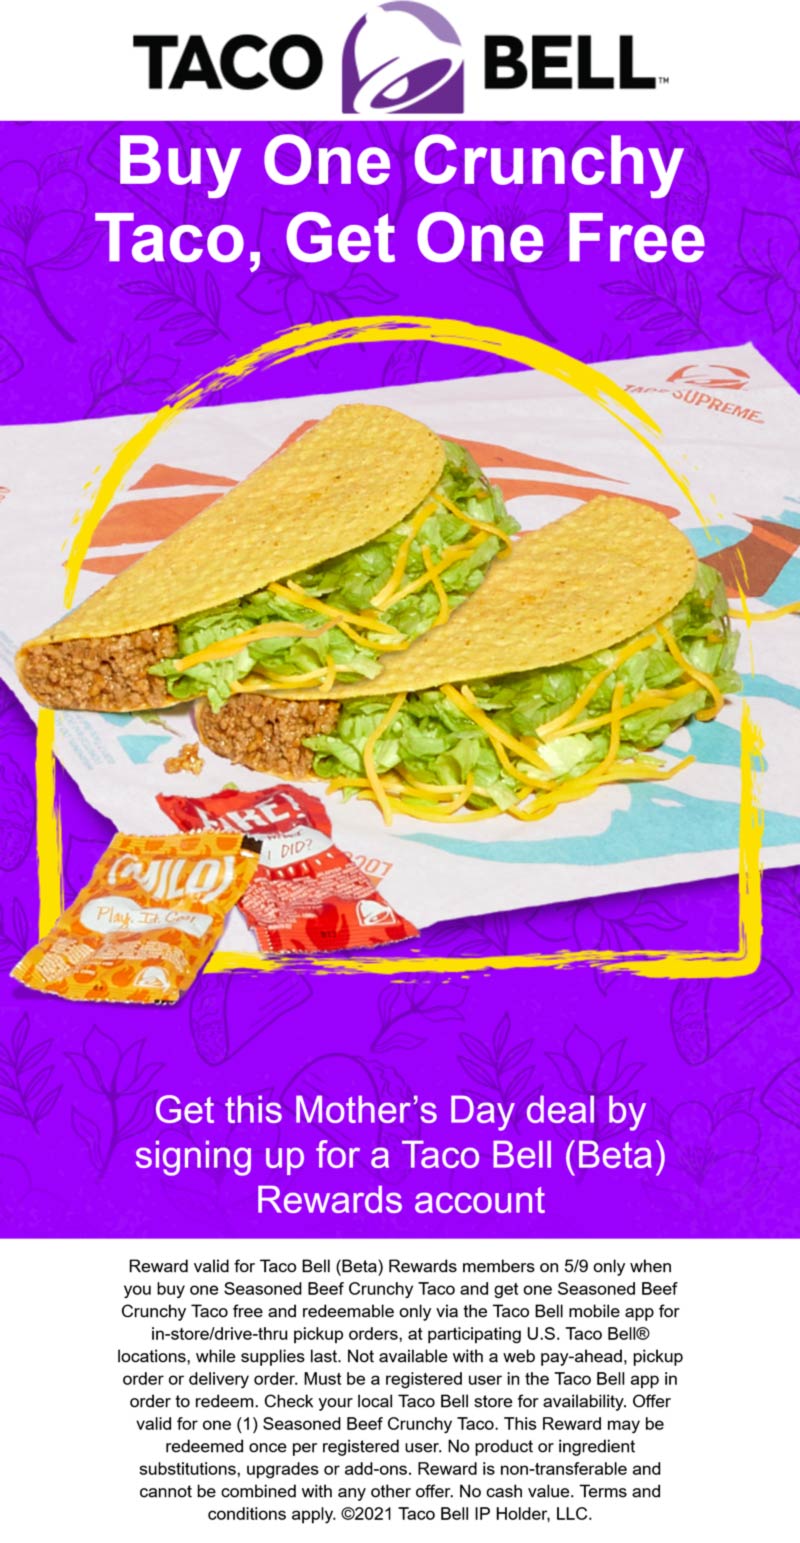 Second taco free for rewards members today at Taco Bell tacobell The